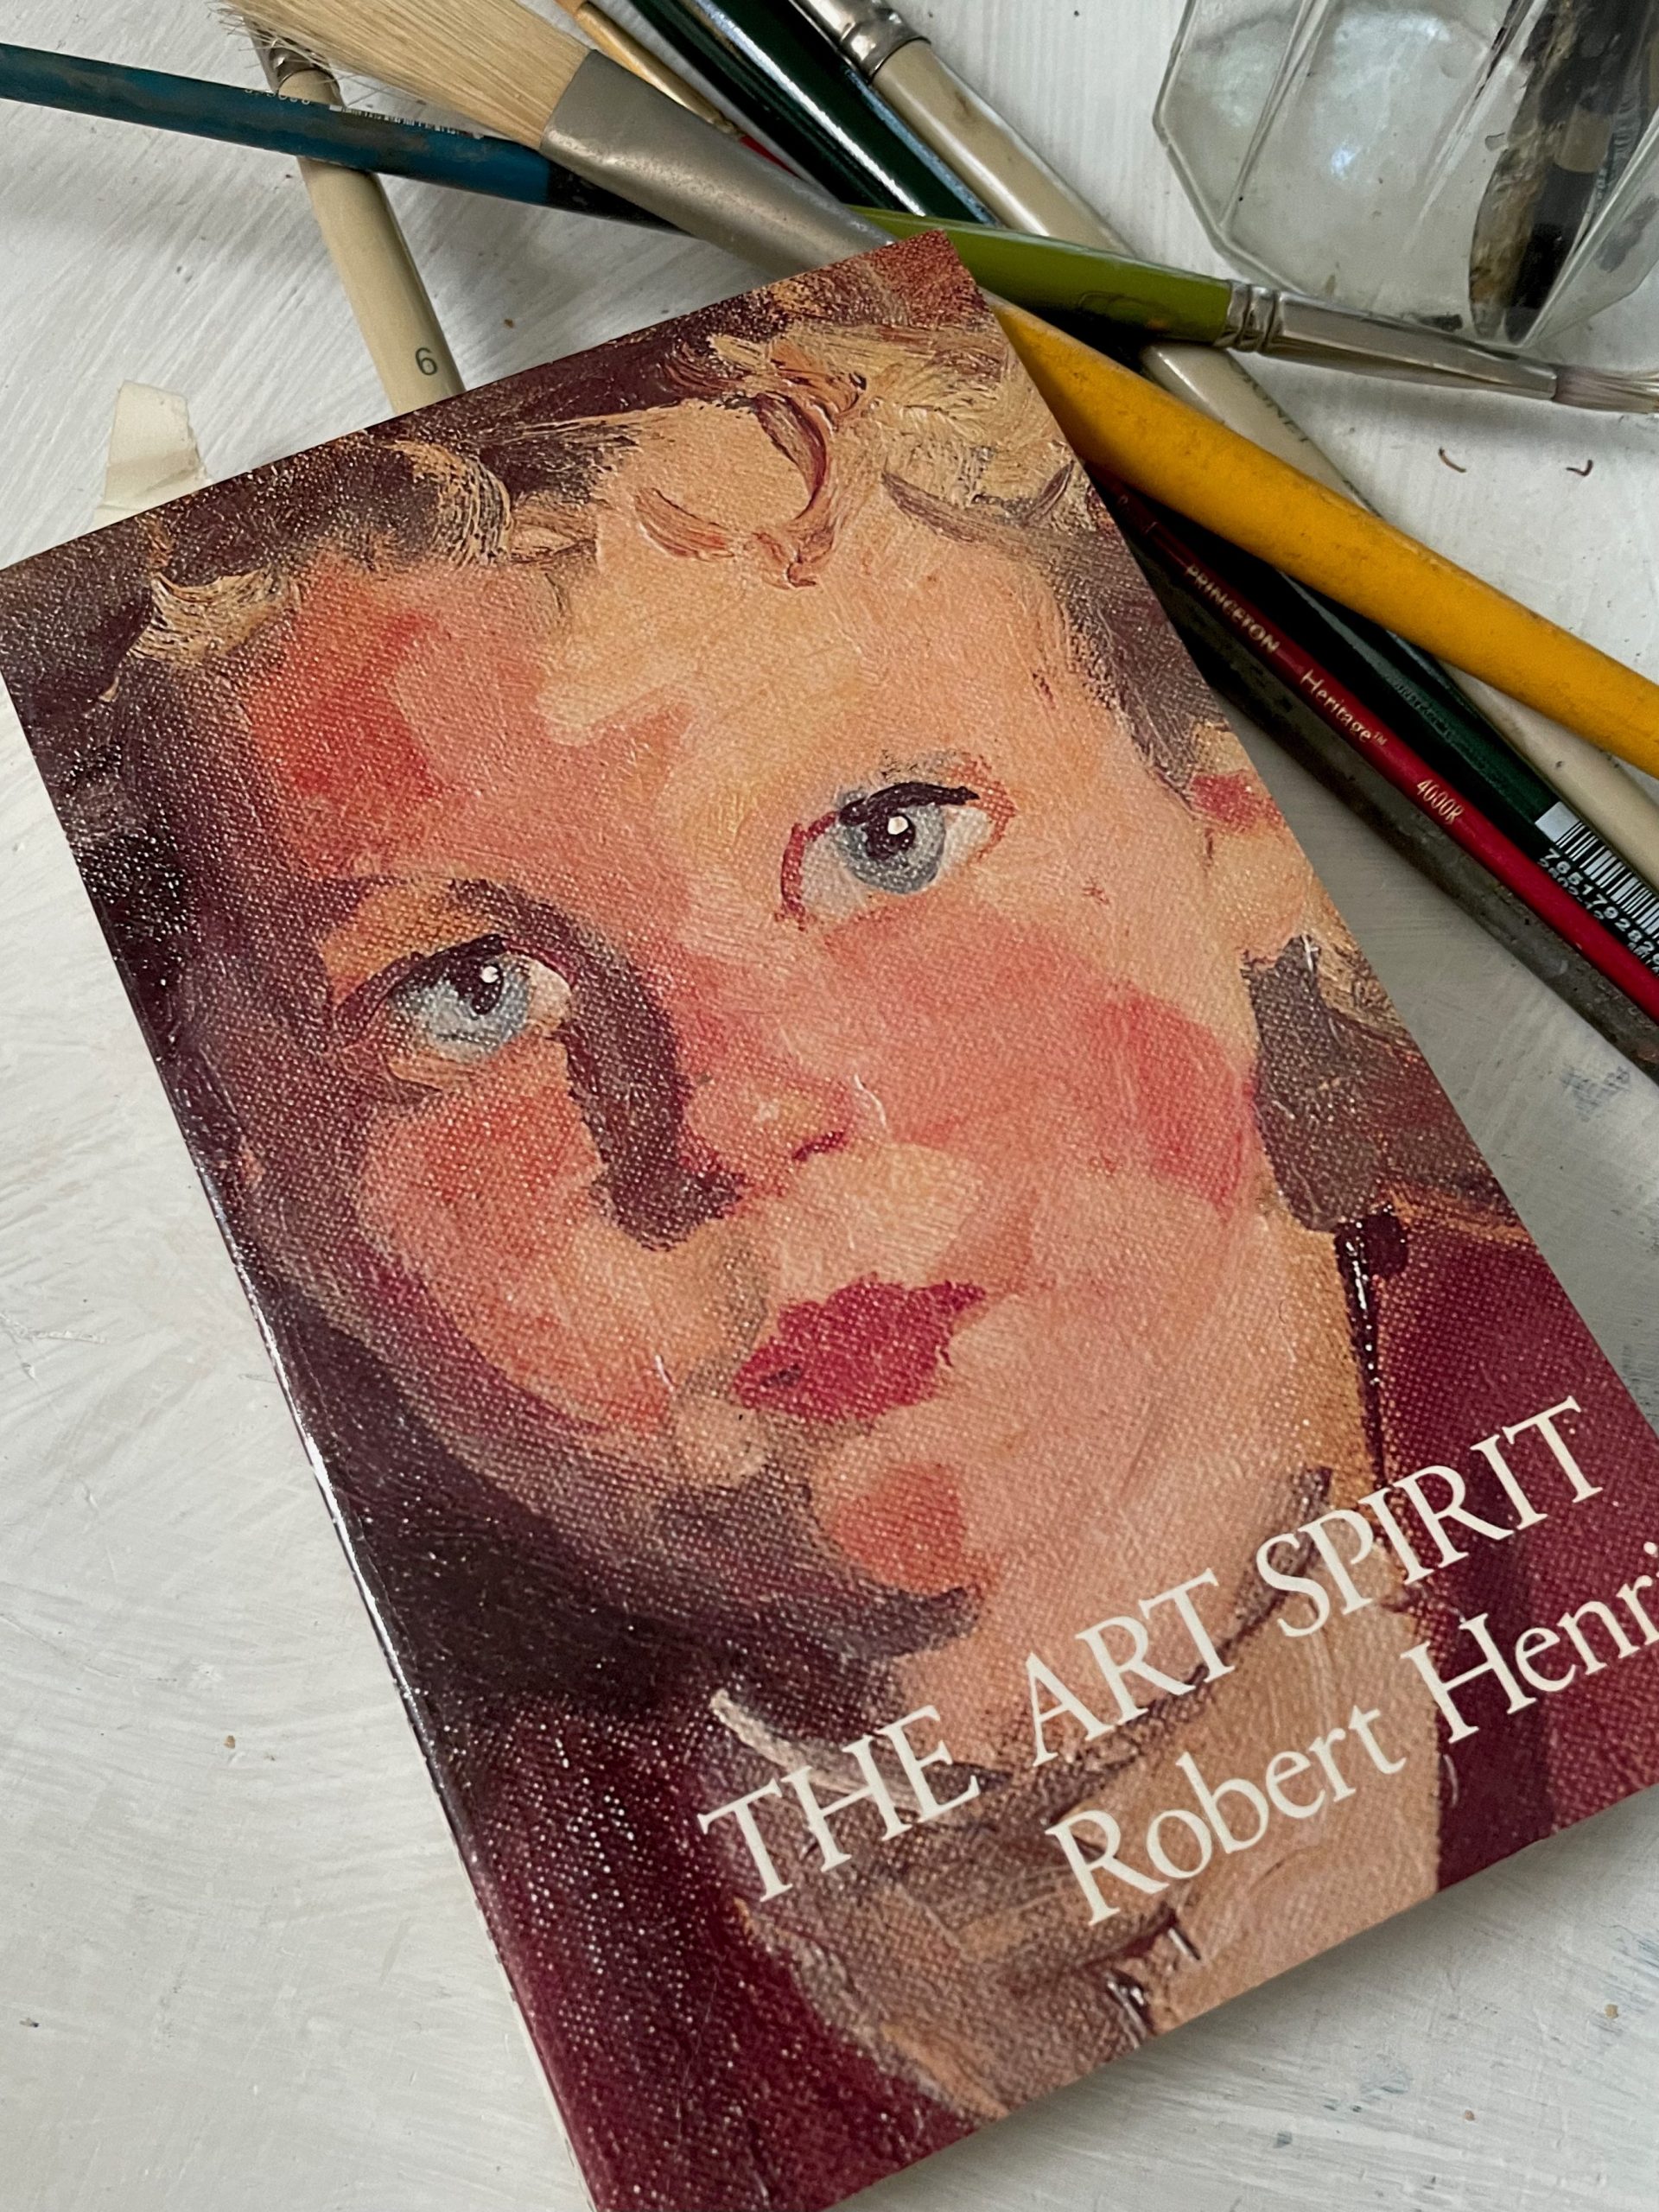 Read more about the article Art Book Group, Second Read:                                                     “The Art Spirit” by Robert Henri.